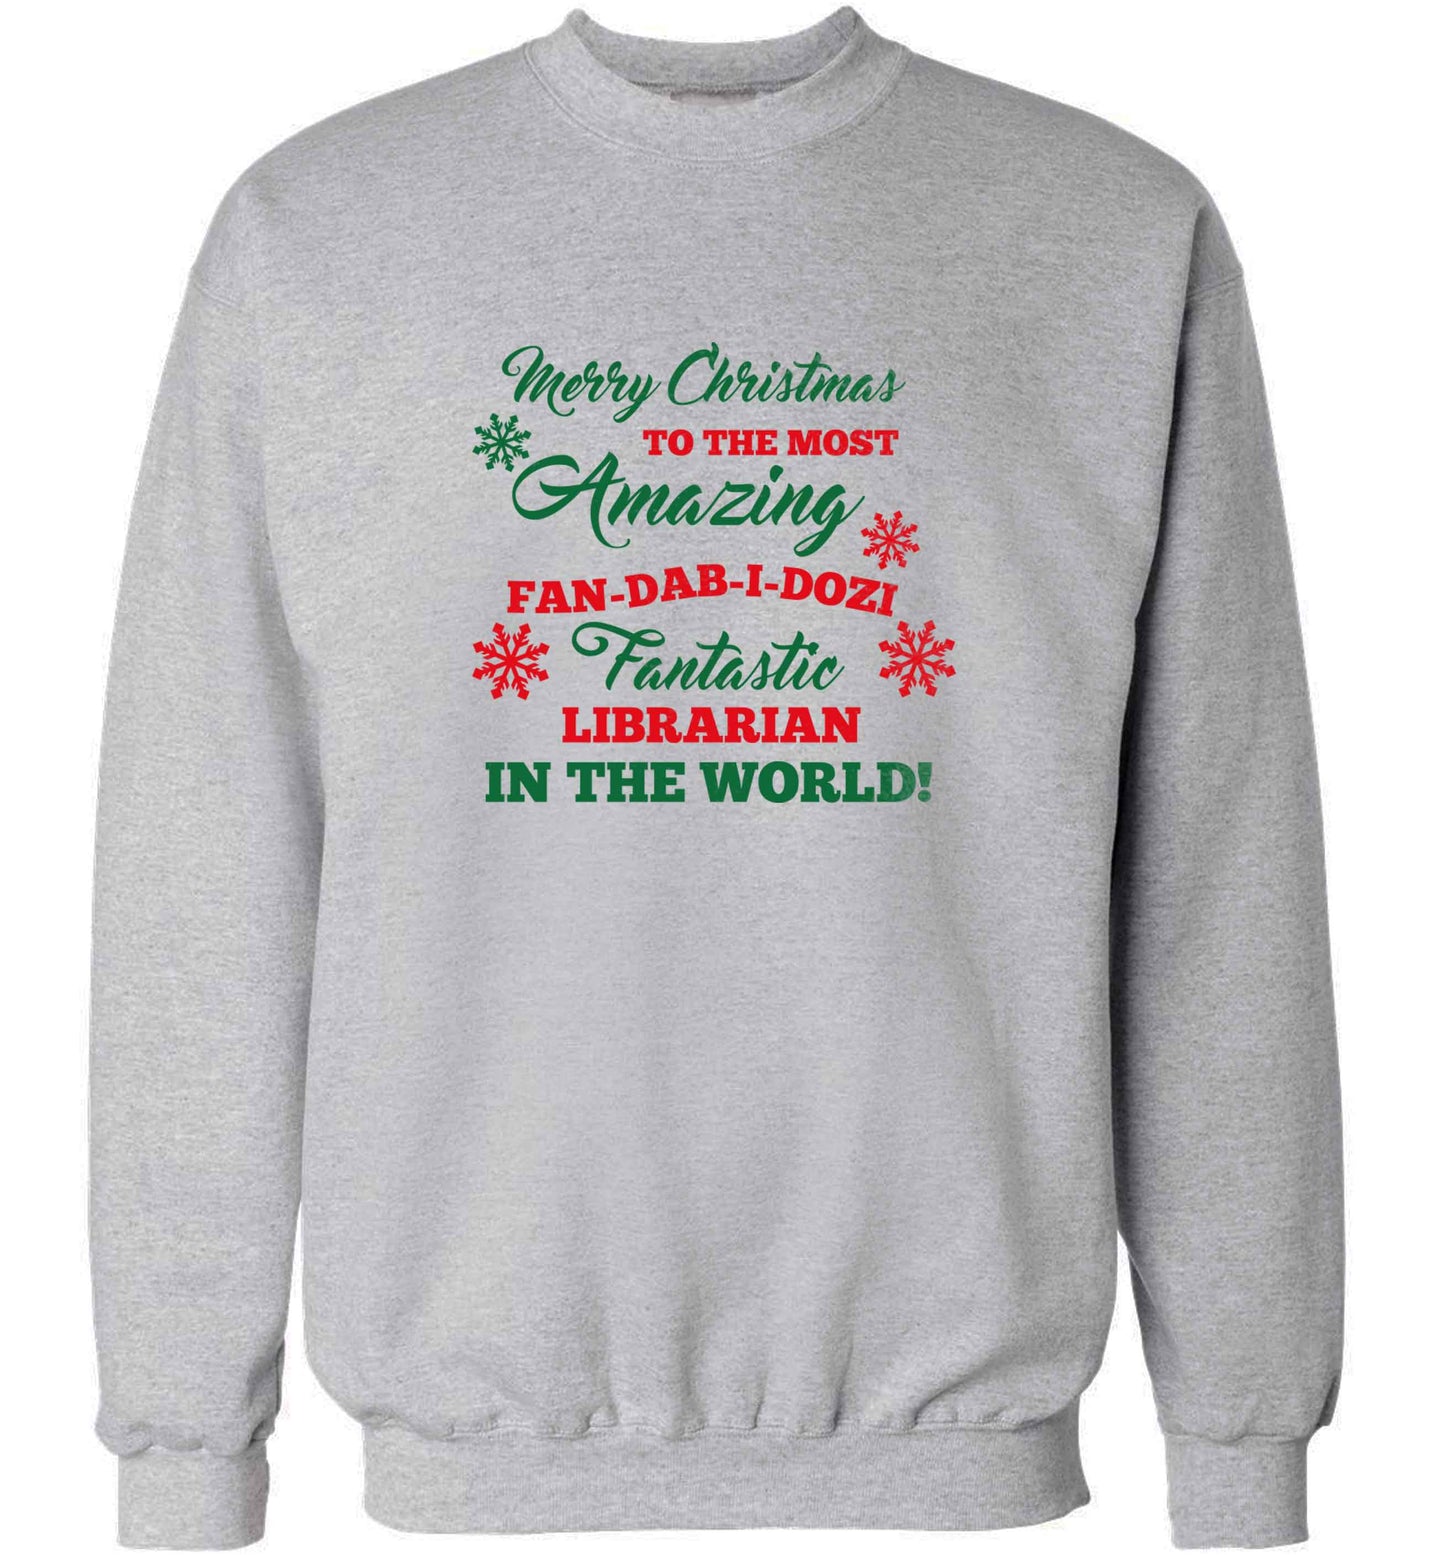 Merry Christmas to the most amazing librarian in the world! adult's unisex grey sweater 2XL